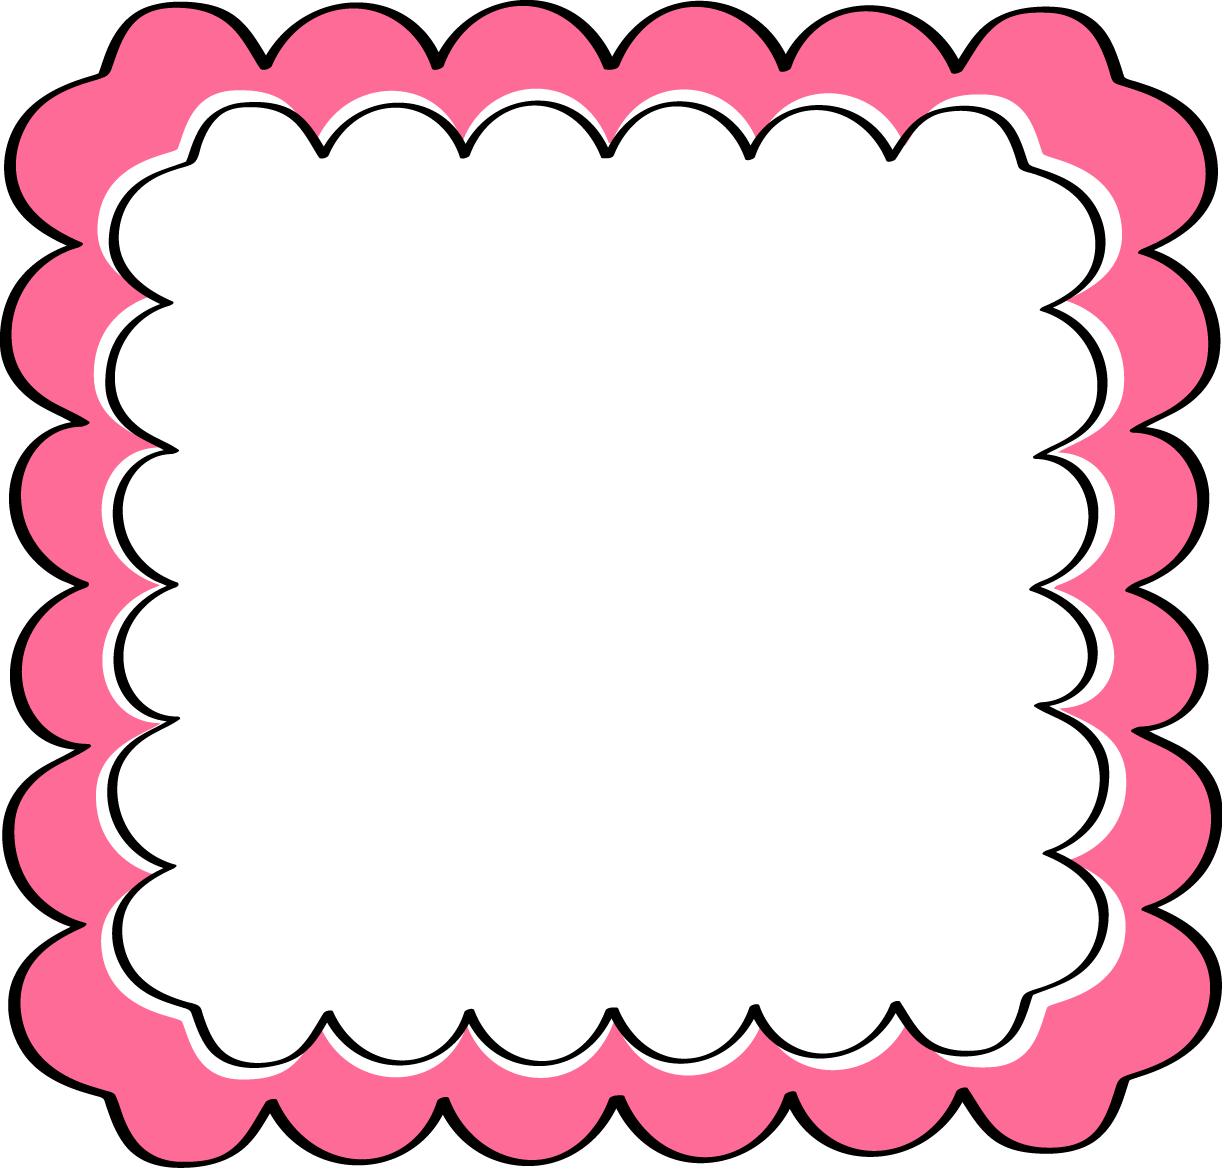 clip art free borders and frames - photo #46